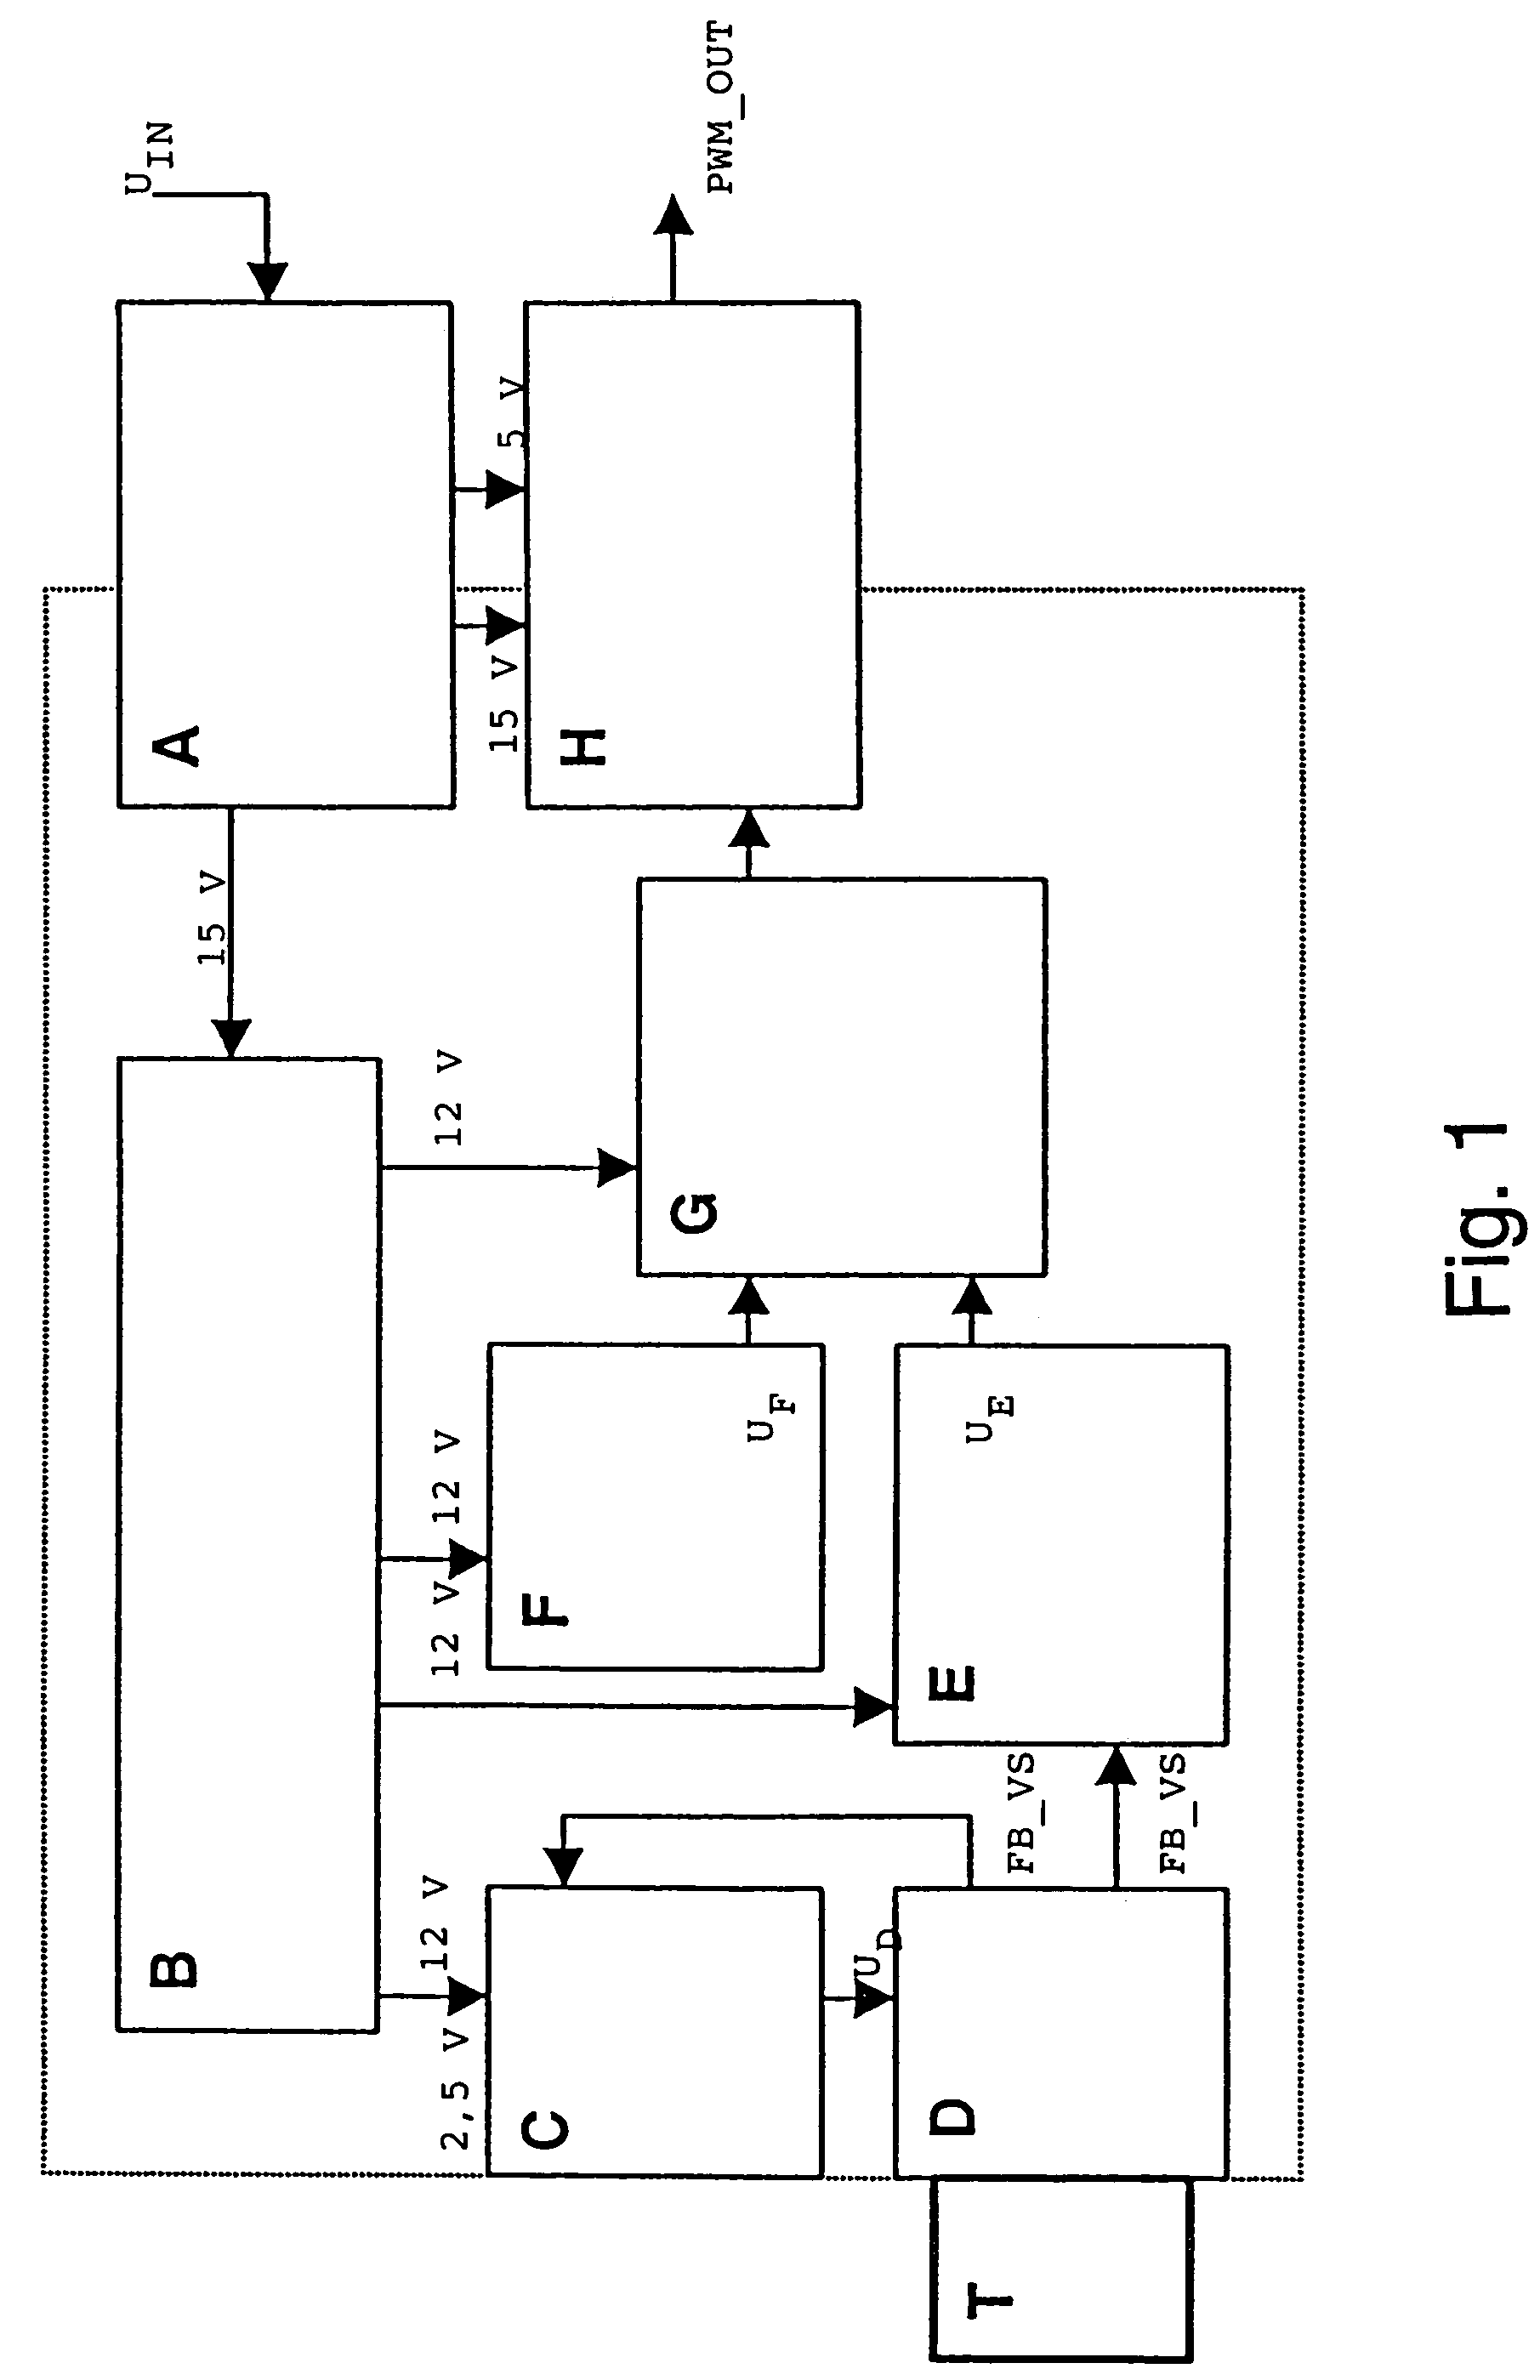 Isolated measurement circuit for sensor resistance